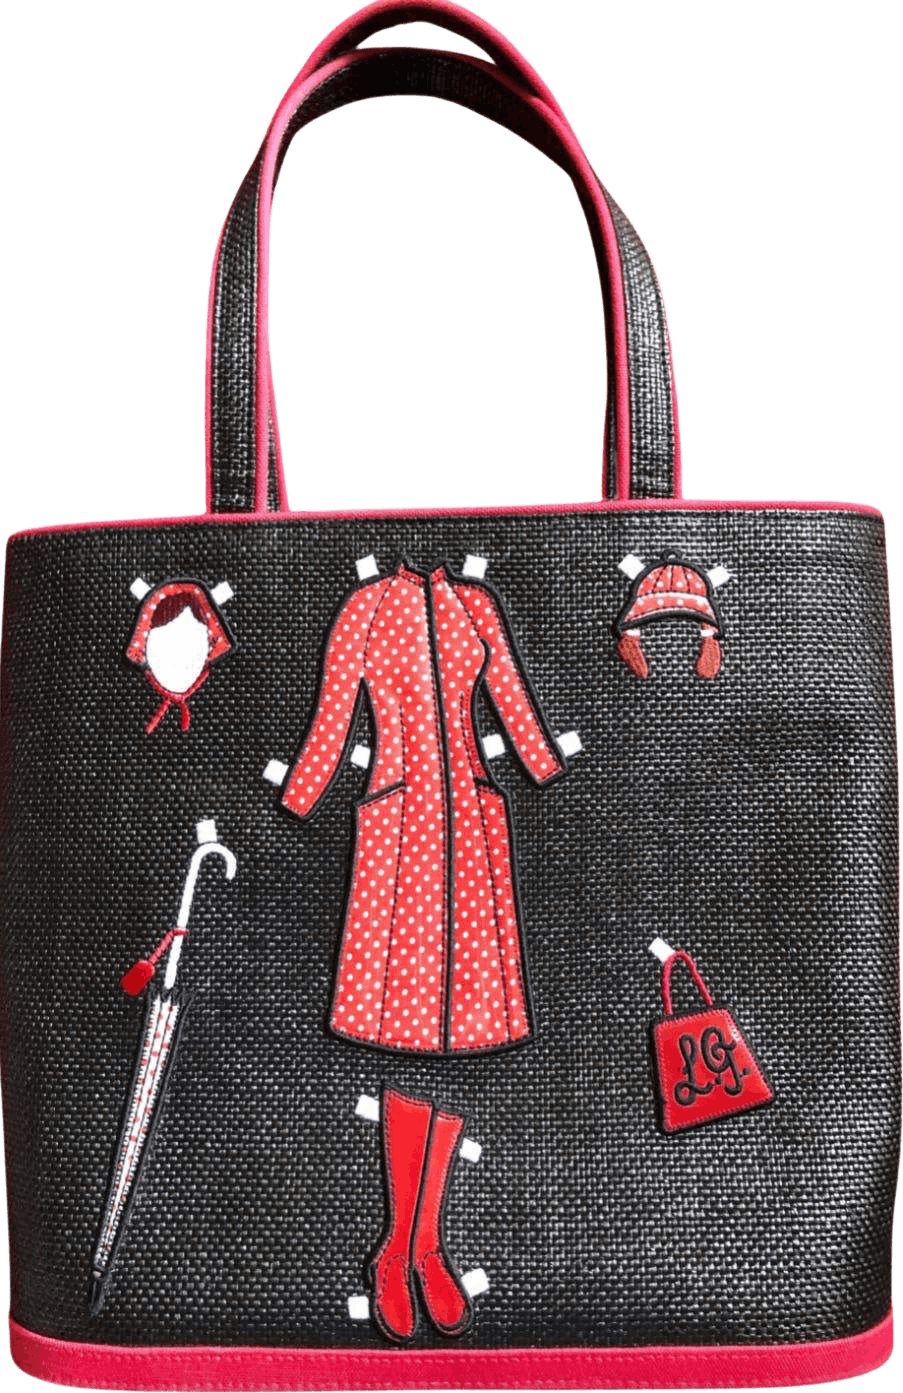 Covent Garden London - Which Lulu Guinness purse is your Bank Holiday Mood?  To celebrate reopening, Lulu's King Street store is giving away a gift with  every purchase over £250. The super